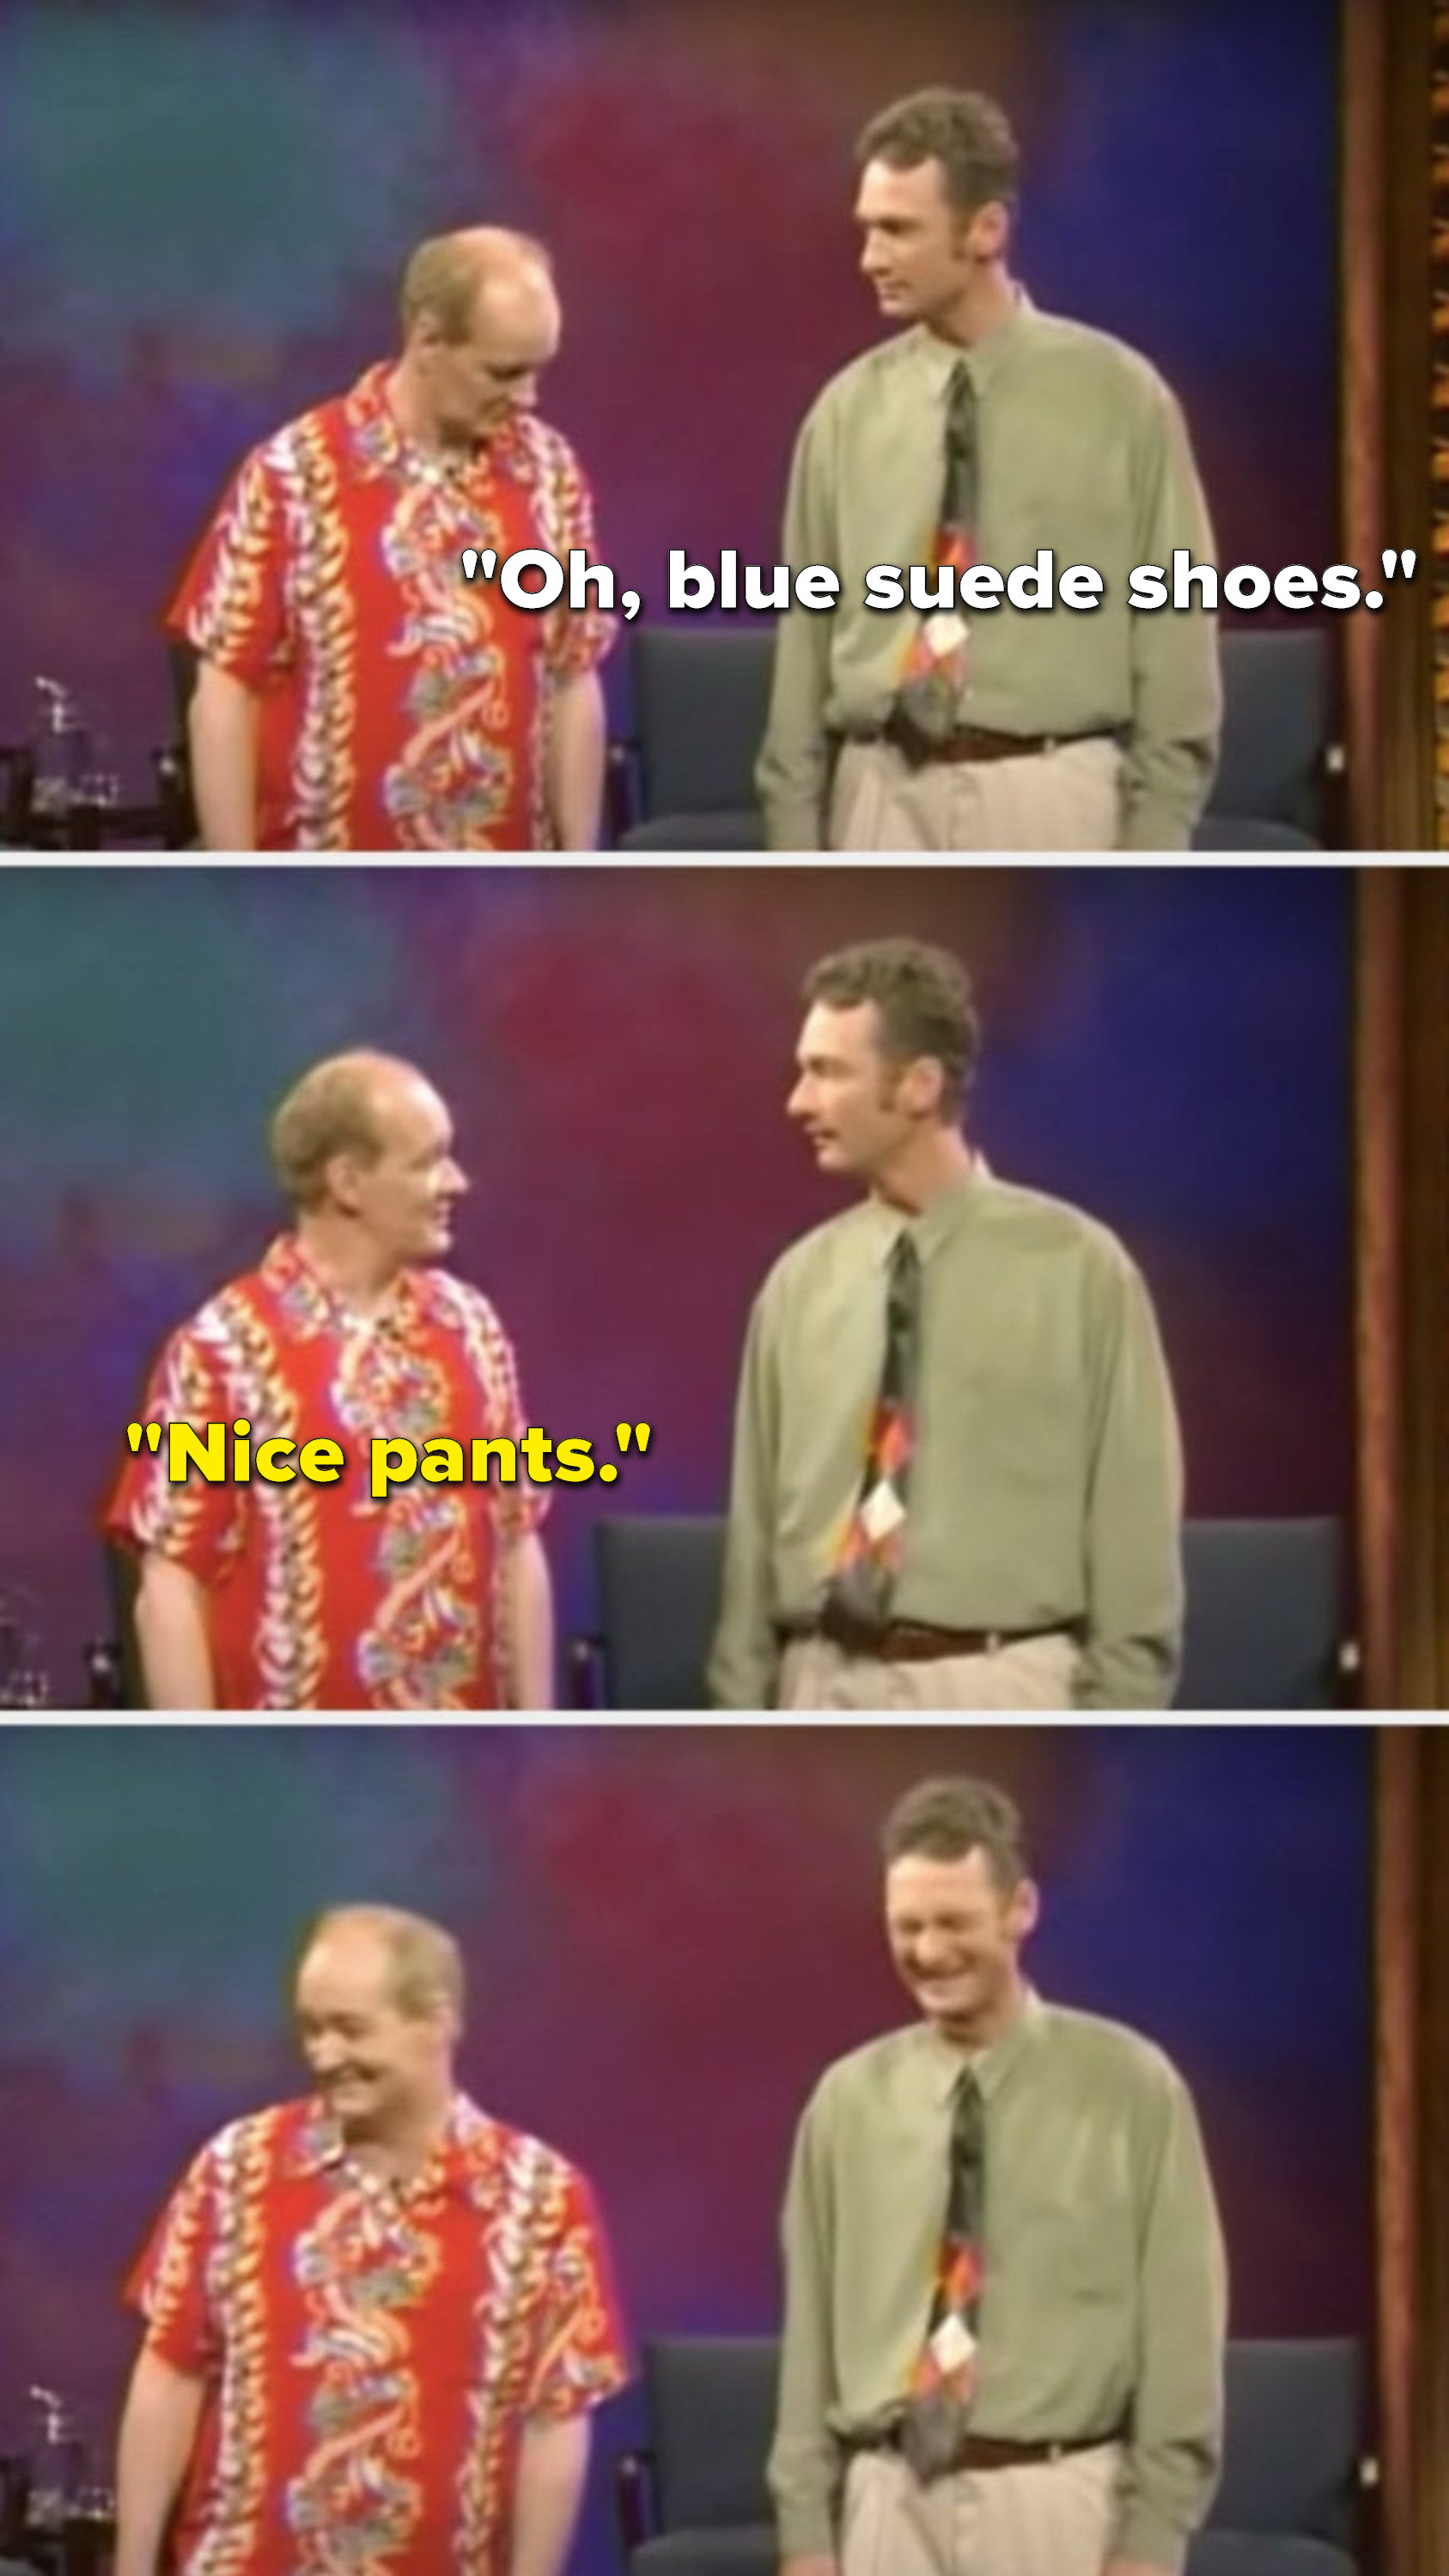 Stiles says, &quot;Oh, blue suede shoes,&quot; and Mochrie says, &quot;Nice pants,&quot; and the two of them laugh and Mochrie moves to exit the scene